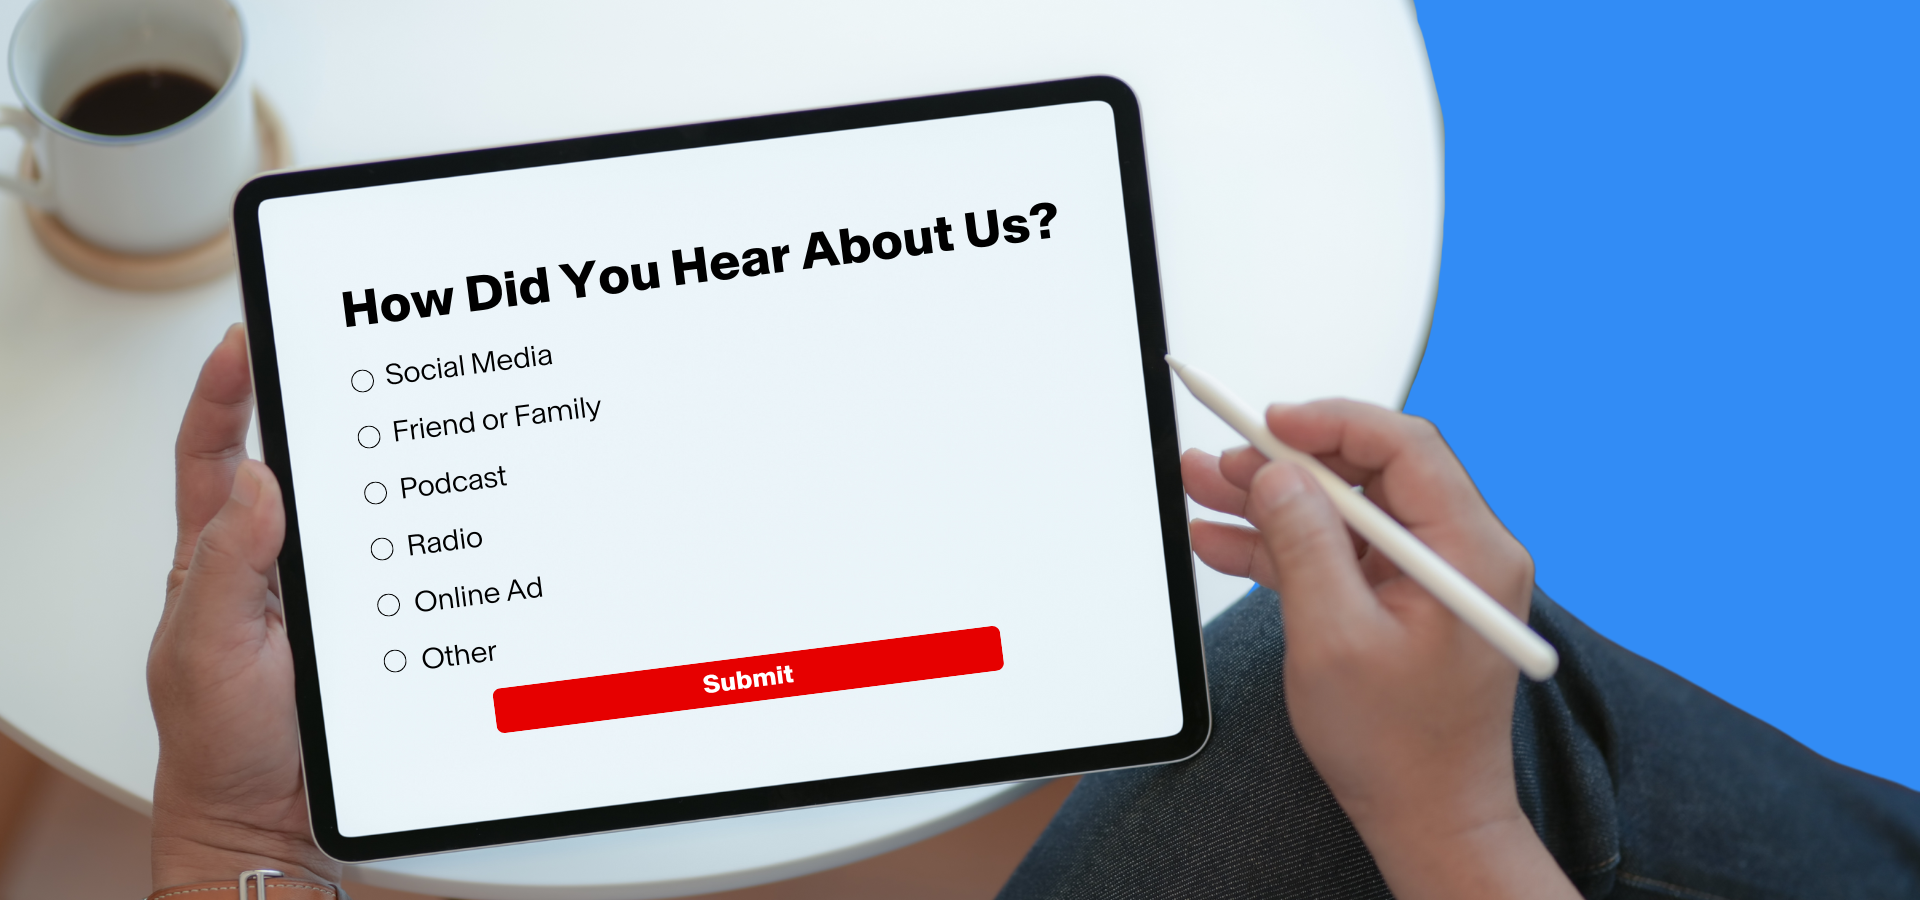 A Tablet with a "how did you hear about us?" survey on the screen